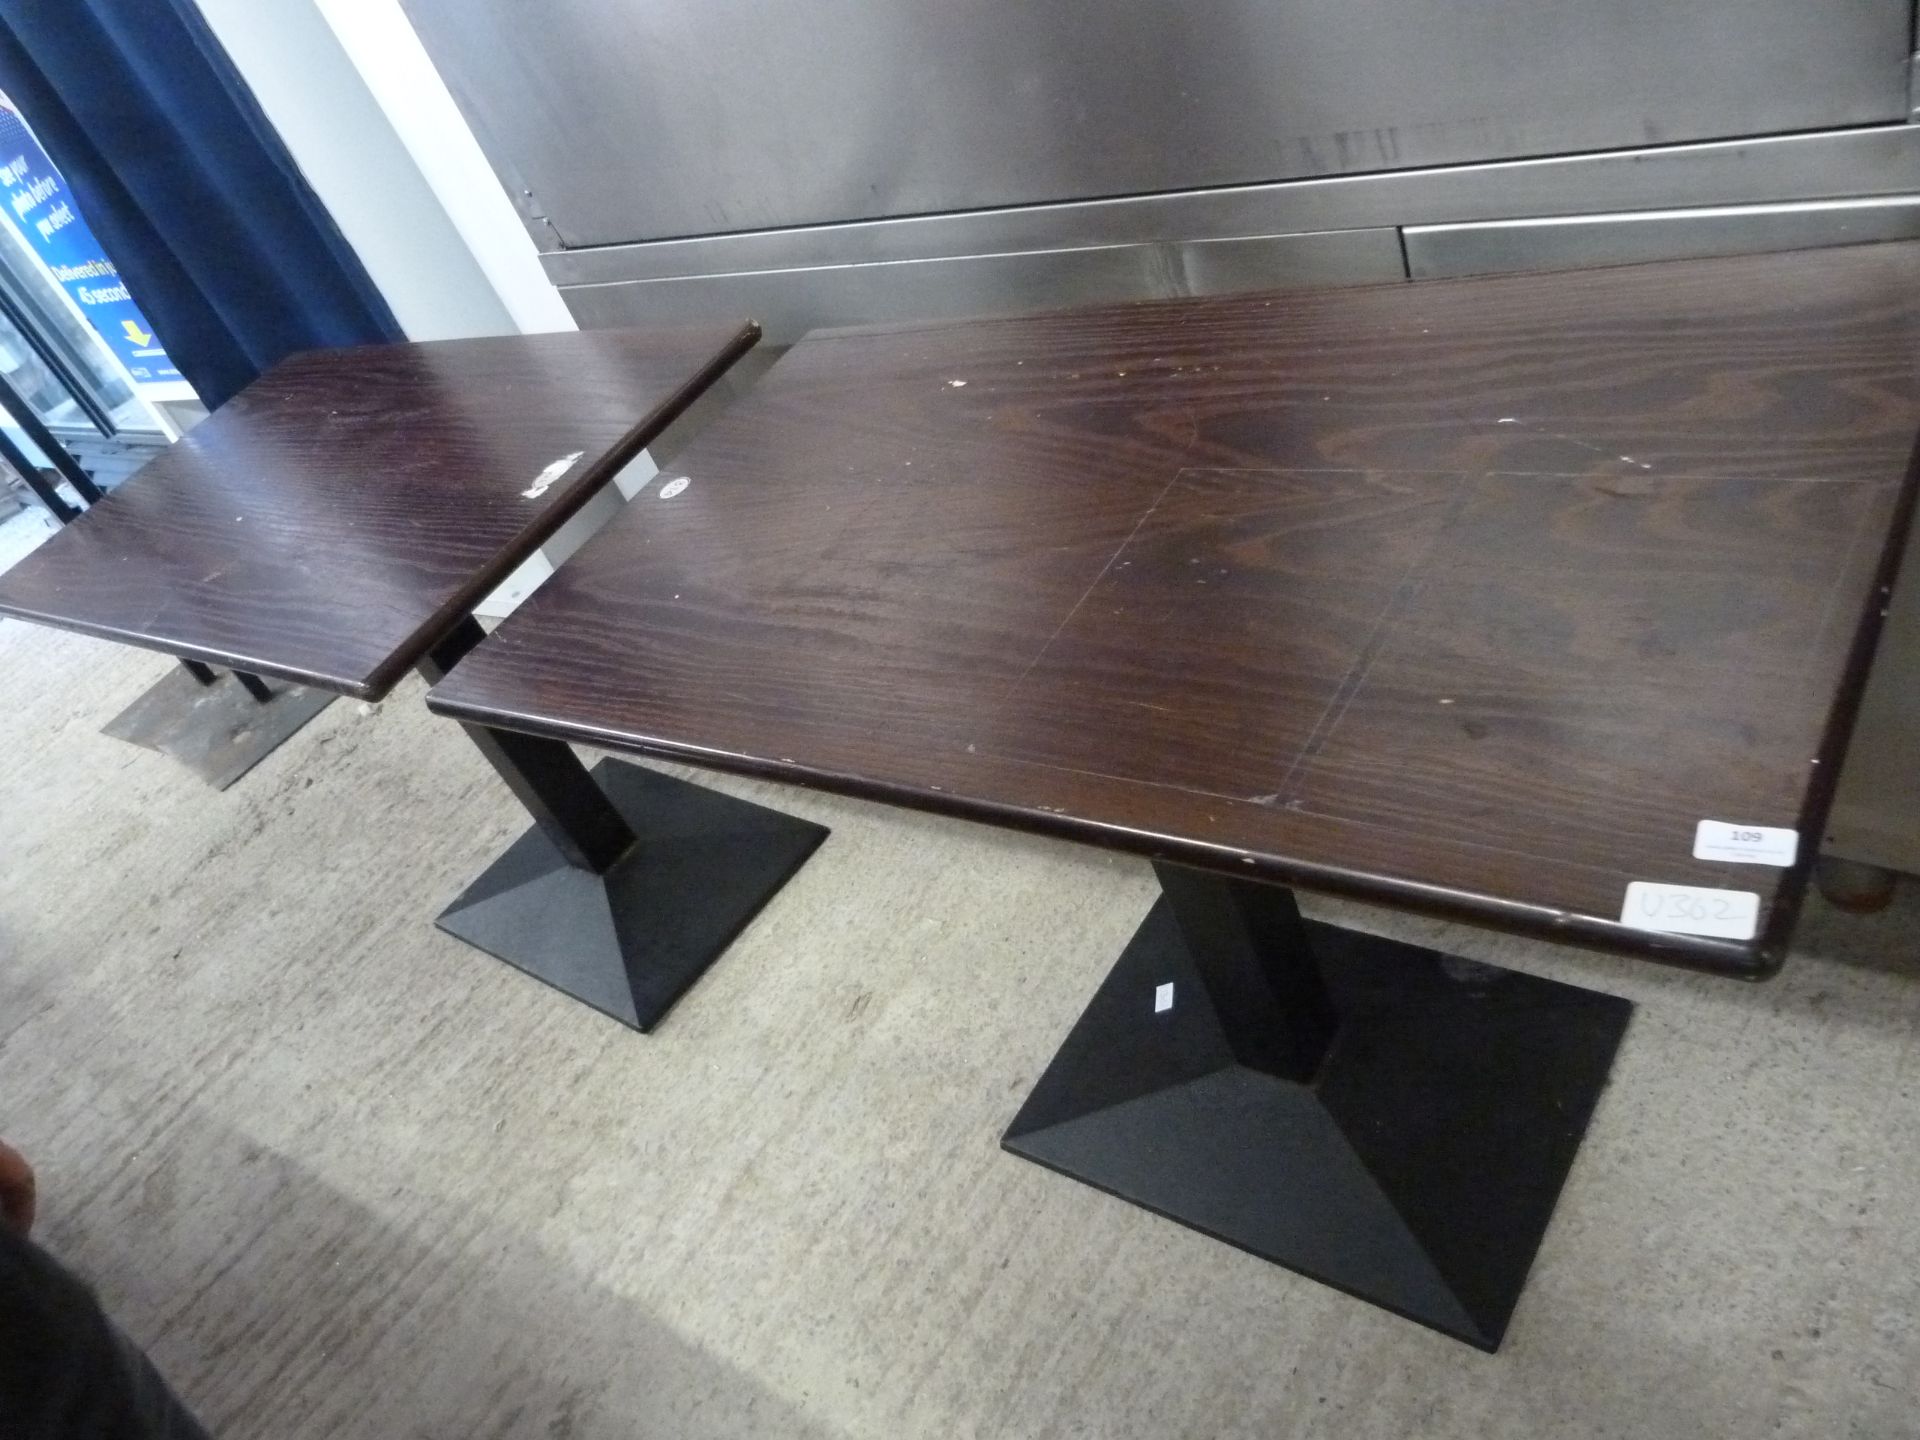 *Two Oblong Single Pedestal Tables with Wooden Top